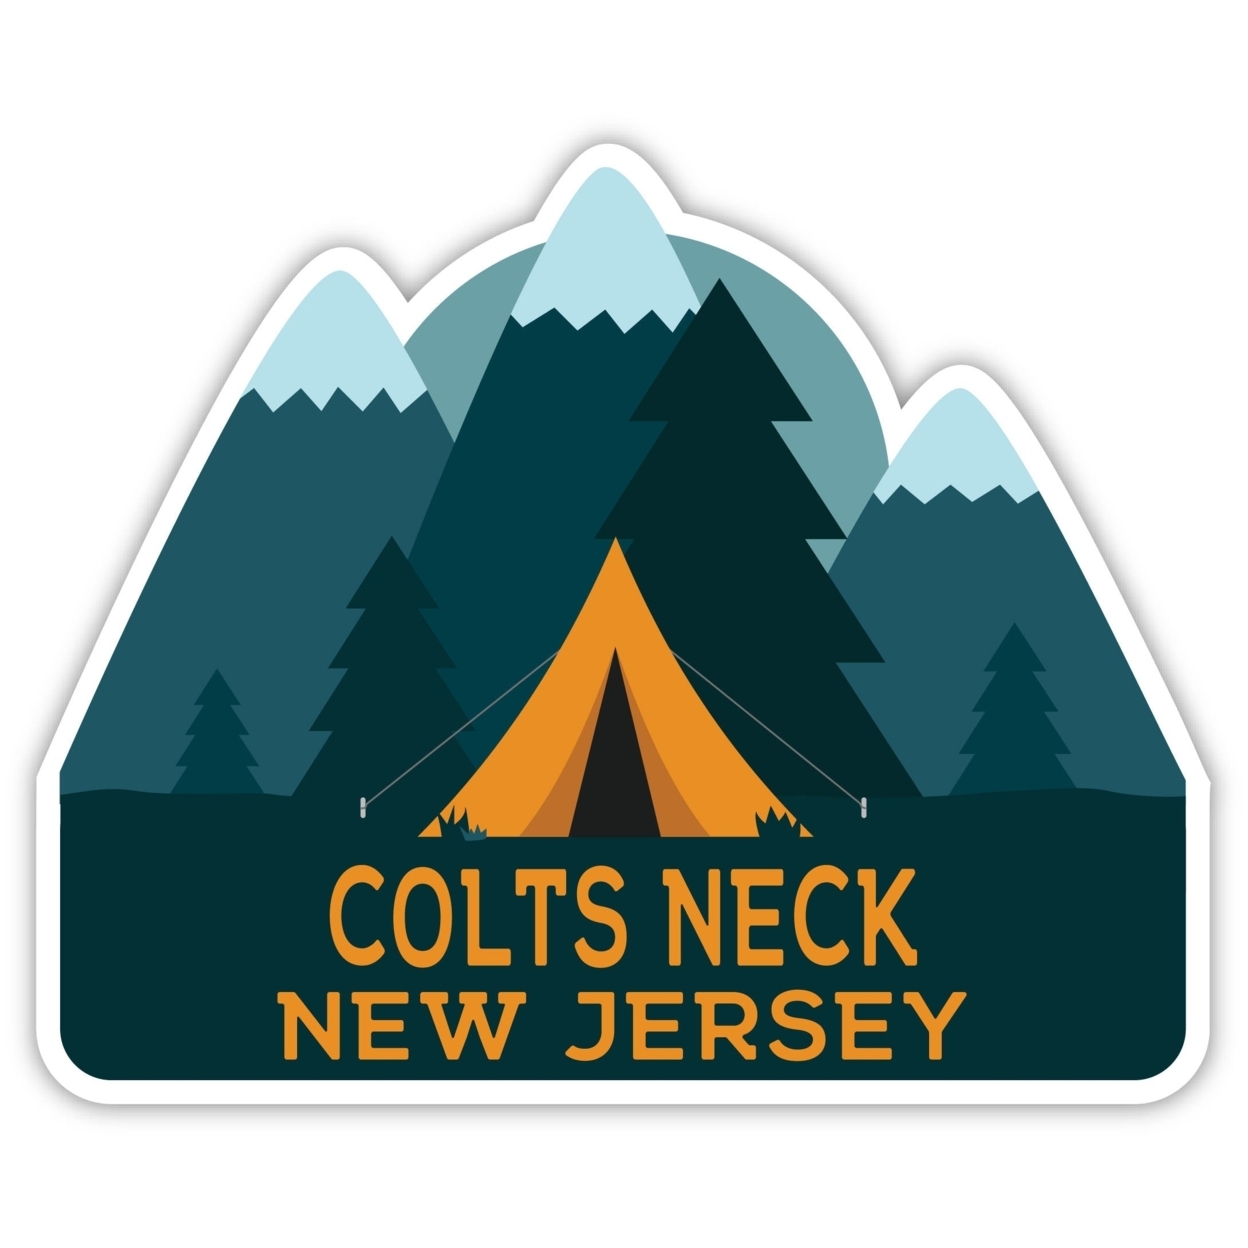 Colts Neck New Jersey Souvenir Decorative Stickers (Choose Theme And Size) - 4-Pack, 6-Inch, Tent